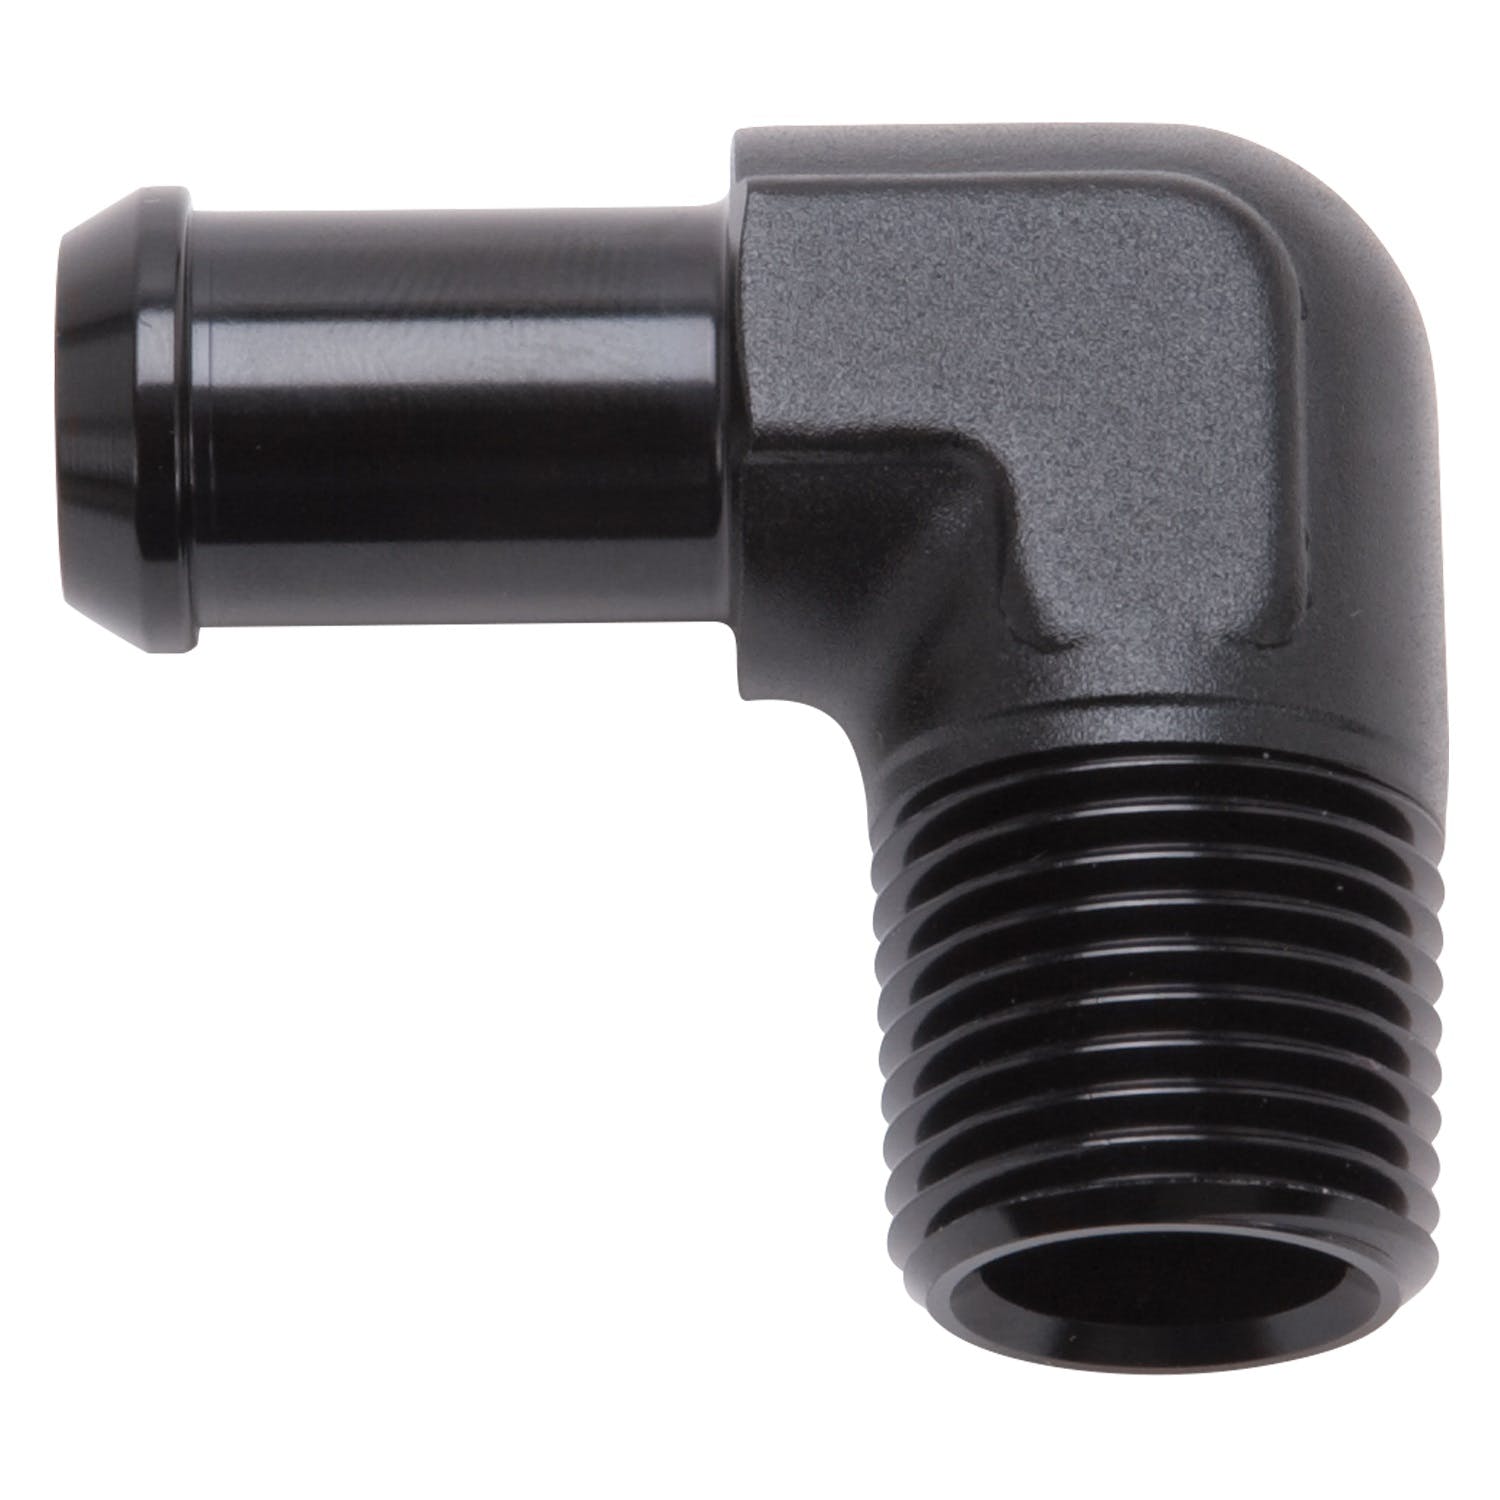 Edelbrock 8178 Heater Hose End Fitting - 90 DEG with 1/2 NPT and 5/8 Barb.